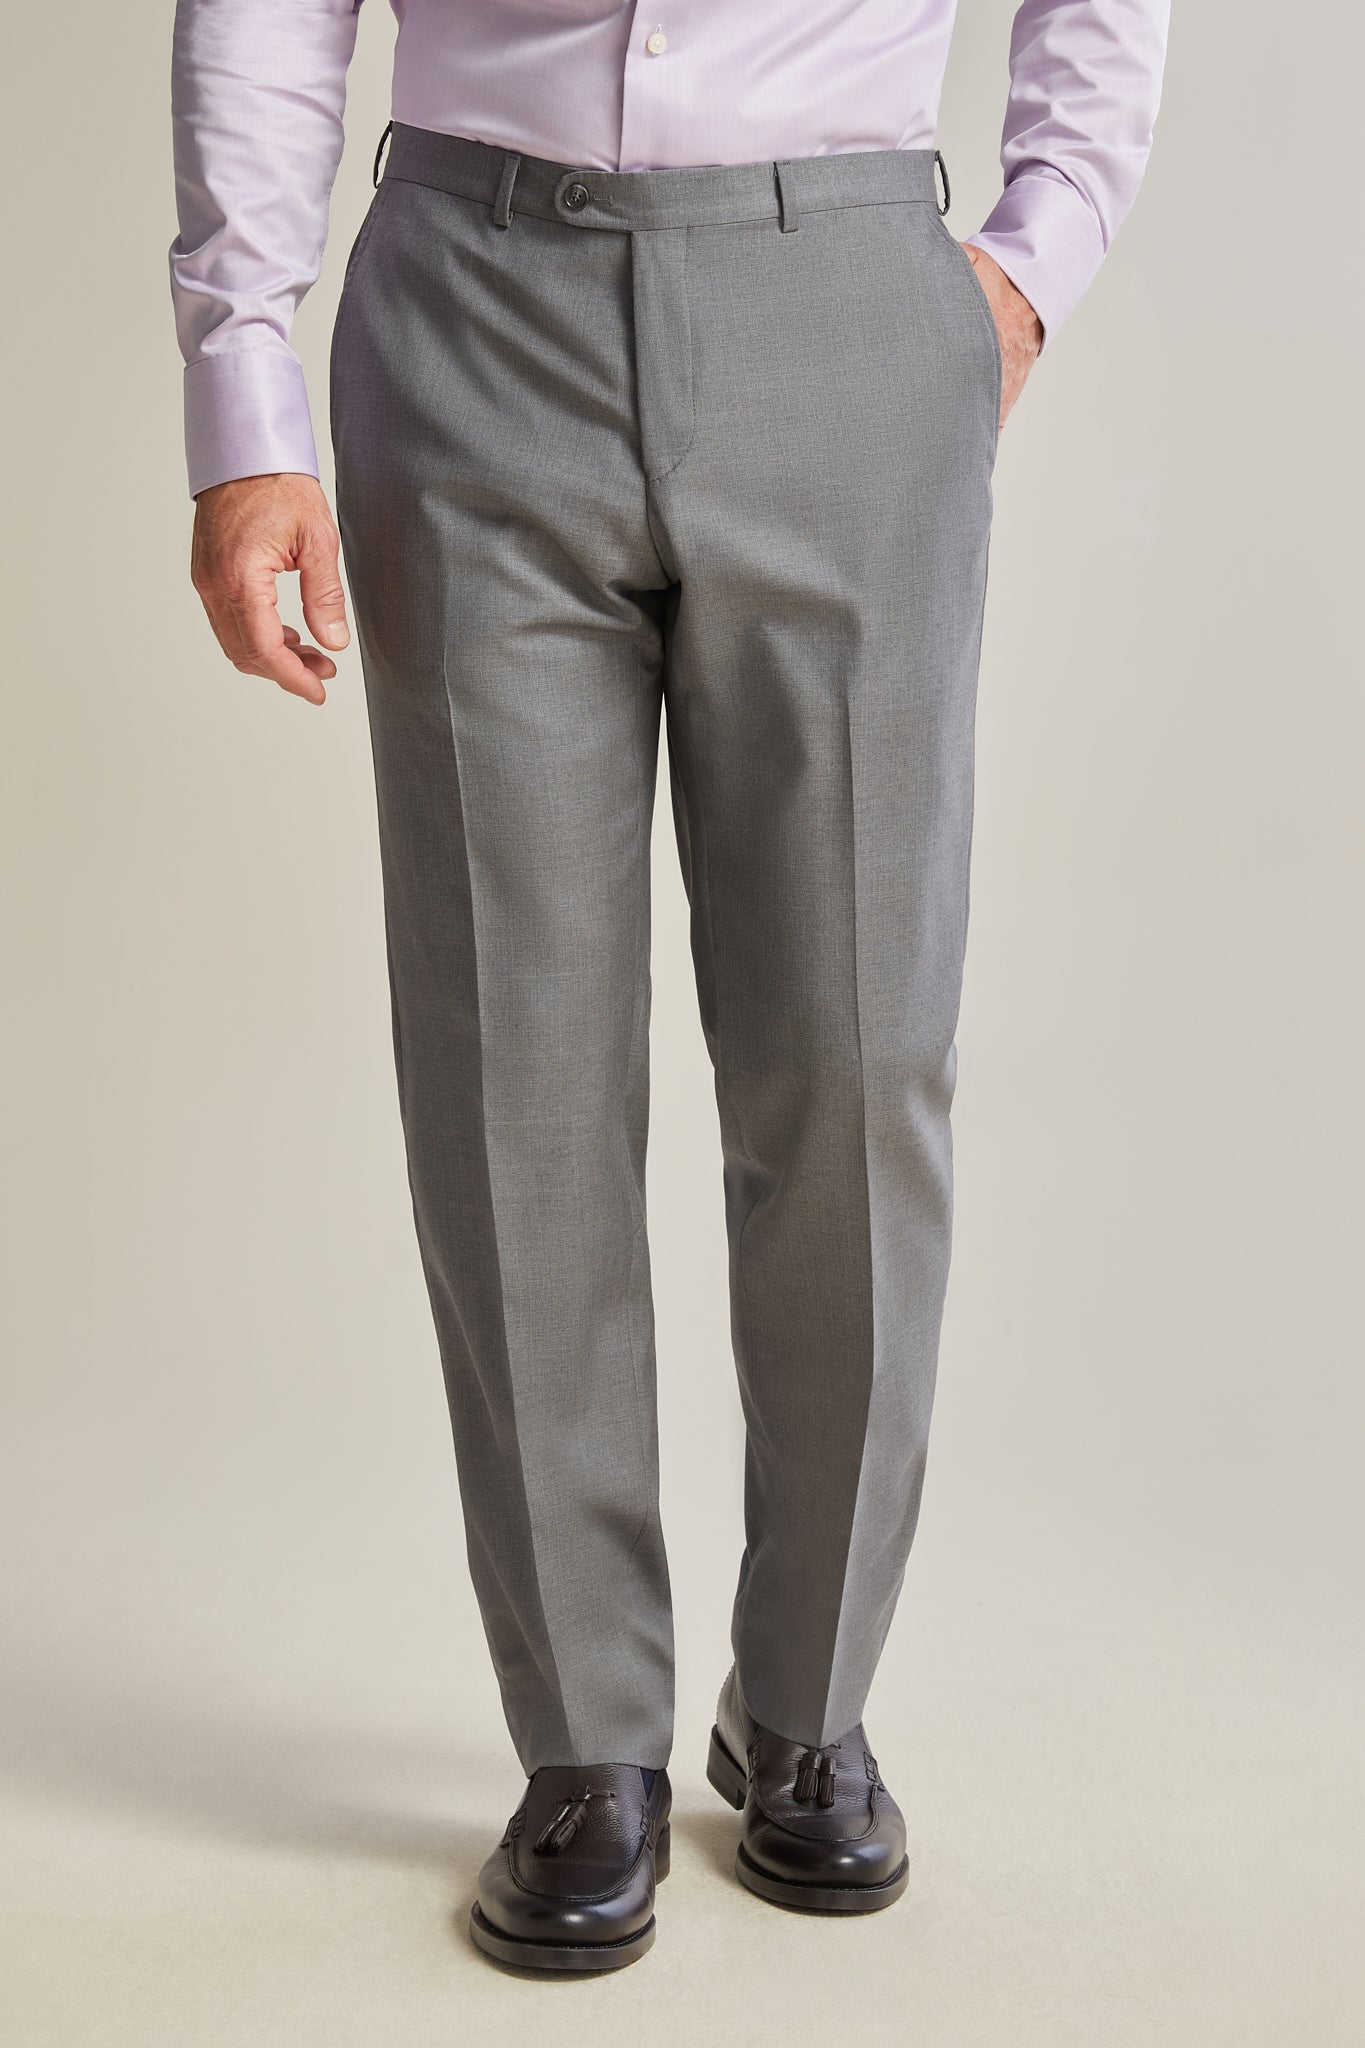 Formal Trouser Pant in Surat at best price by Aardee Apparels - Justdial